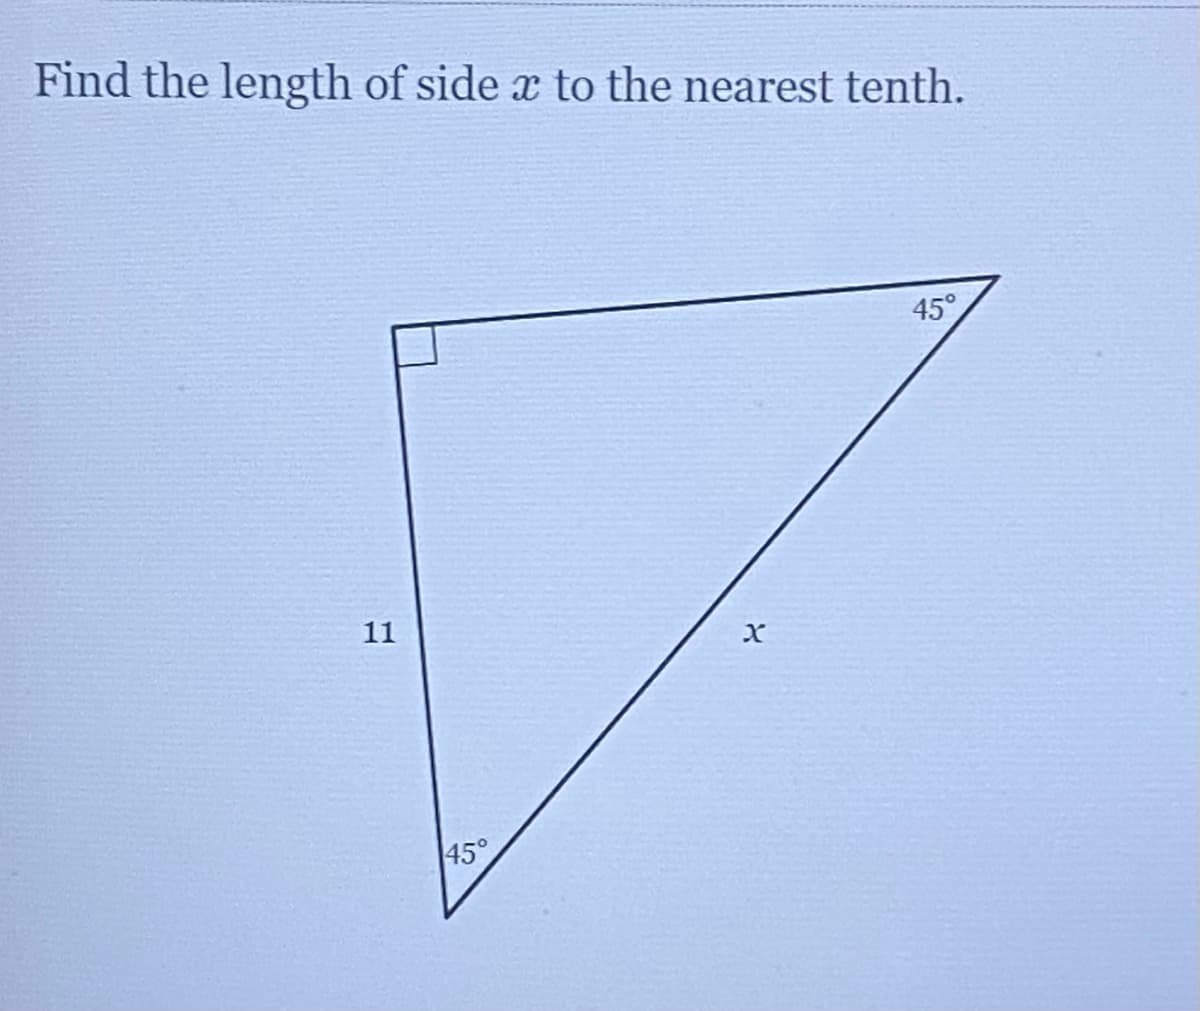 Find the length of side x to the nearest tenth.
45°
11
45°
